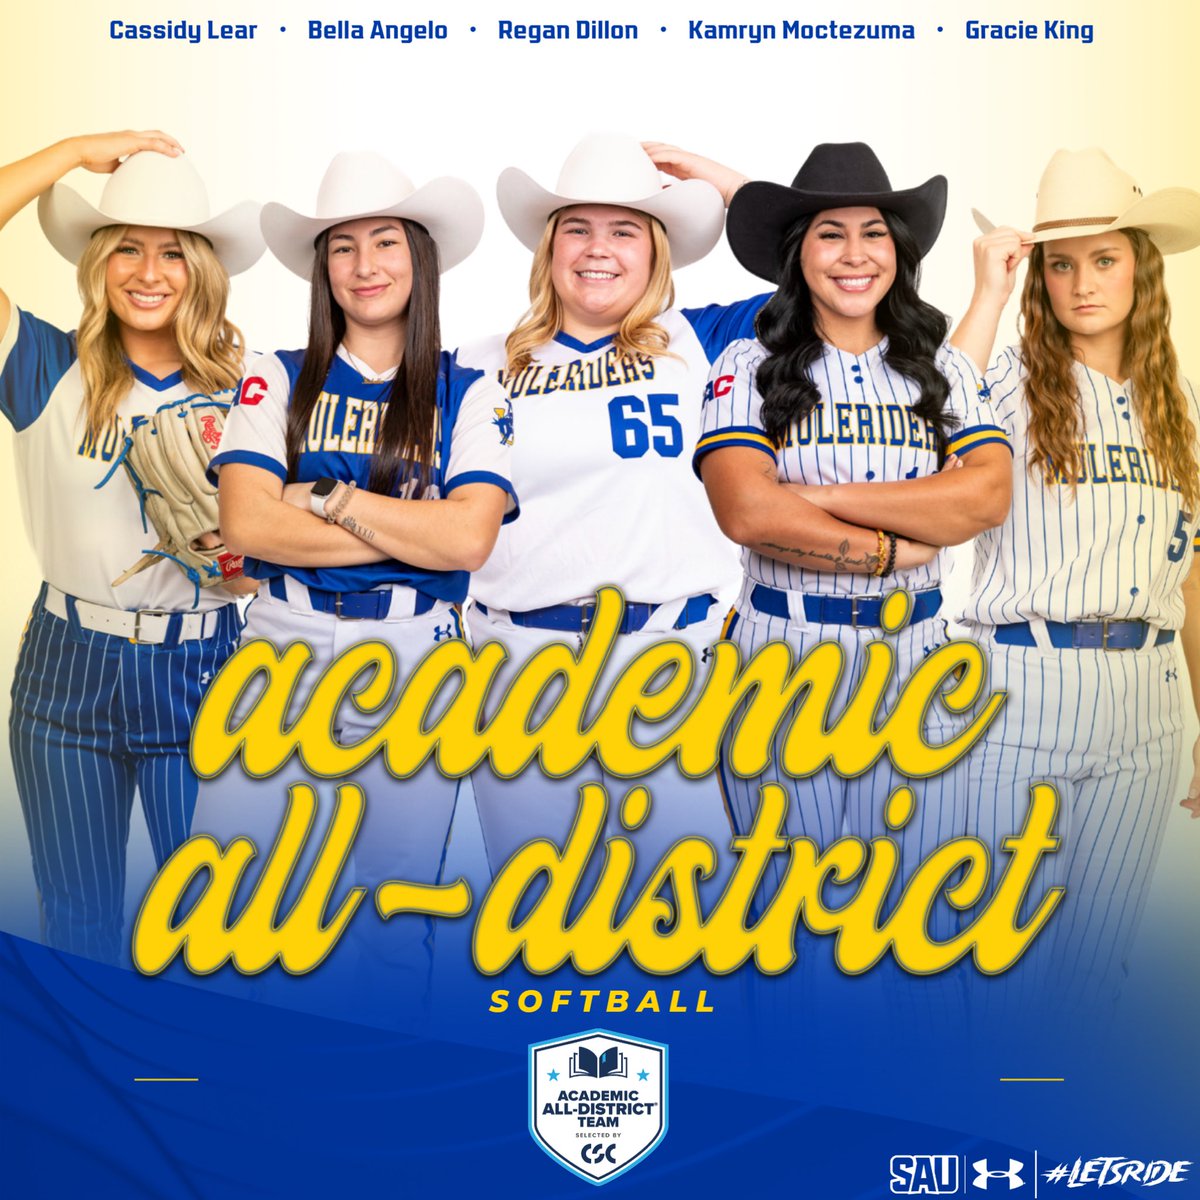 📚🥎🧠𝑮𝒐𝒕 𝒐𝒏 𝒐𝒖𝒓 𝒕𝒉𝒊𝒏𝒌𝒊𝒏𝒈 𝒄𝒂𝒑𝒔 🤠

👏💙💛 Congrats to these 5️⃣ from #team26 on being named CSC Academic All-District‼️

#GoMuleriders #LetsRide